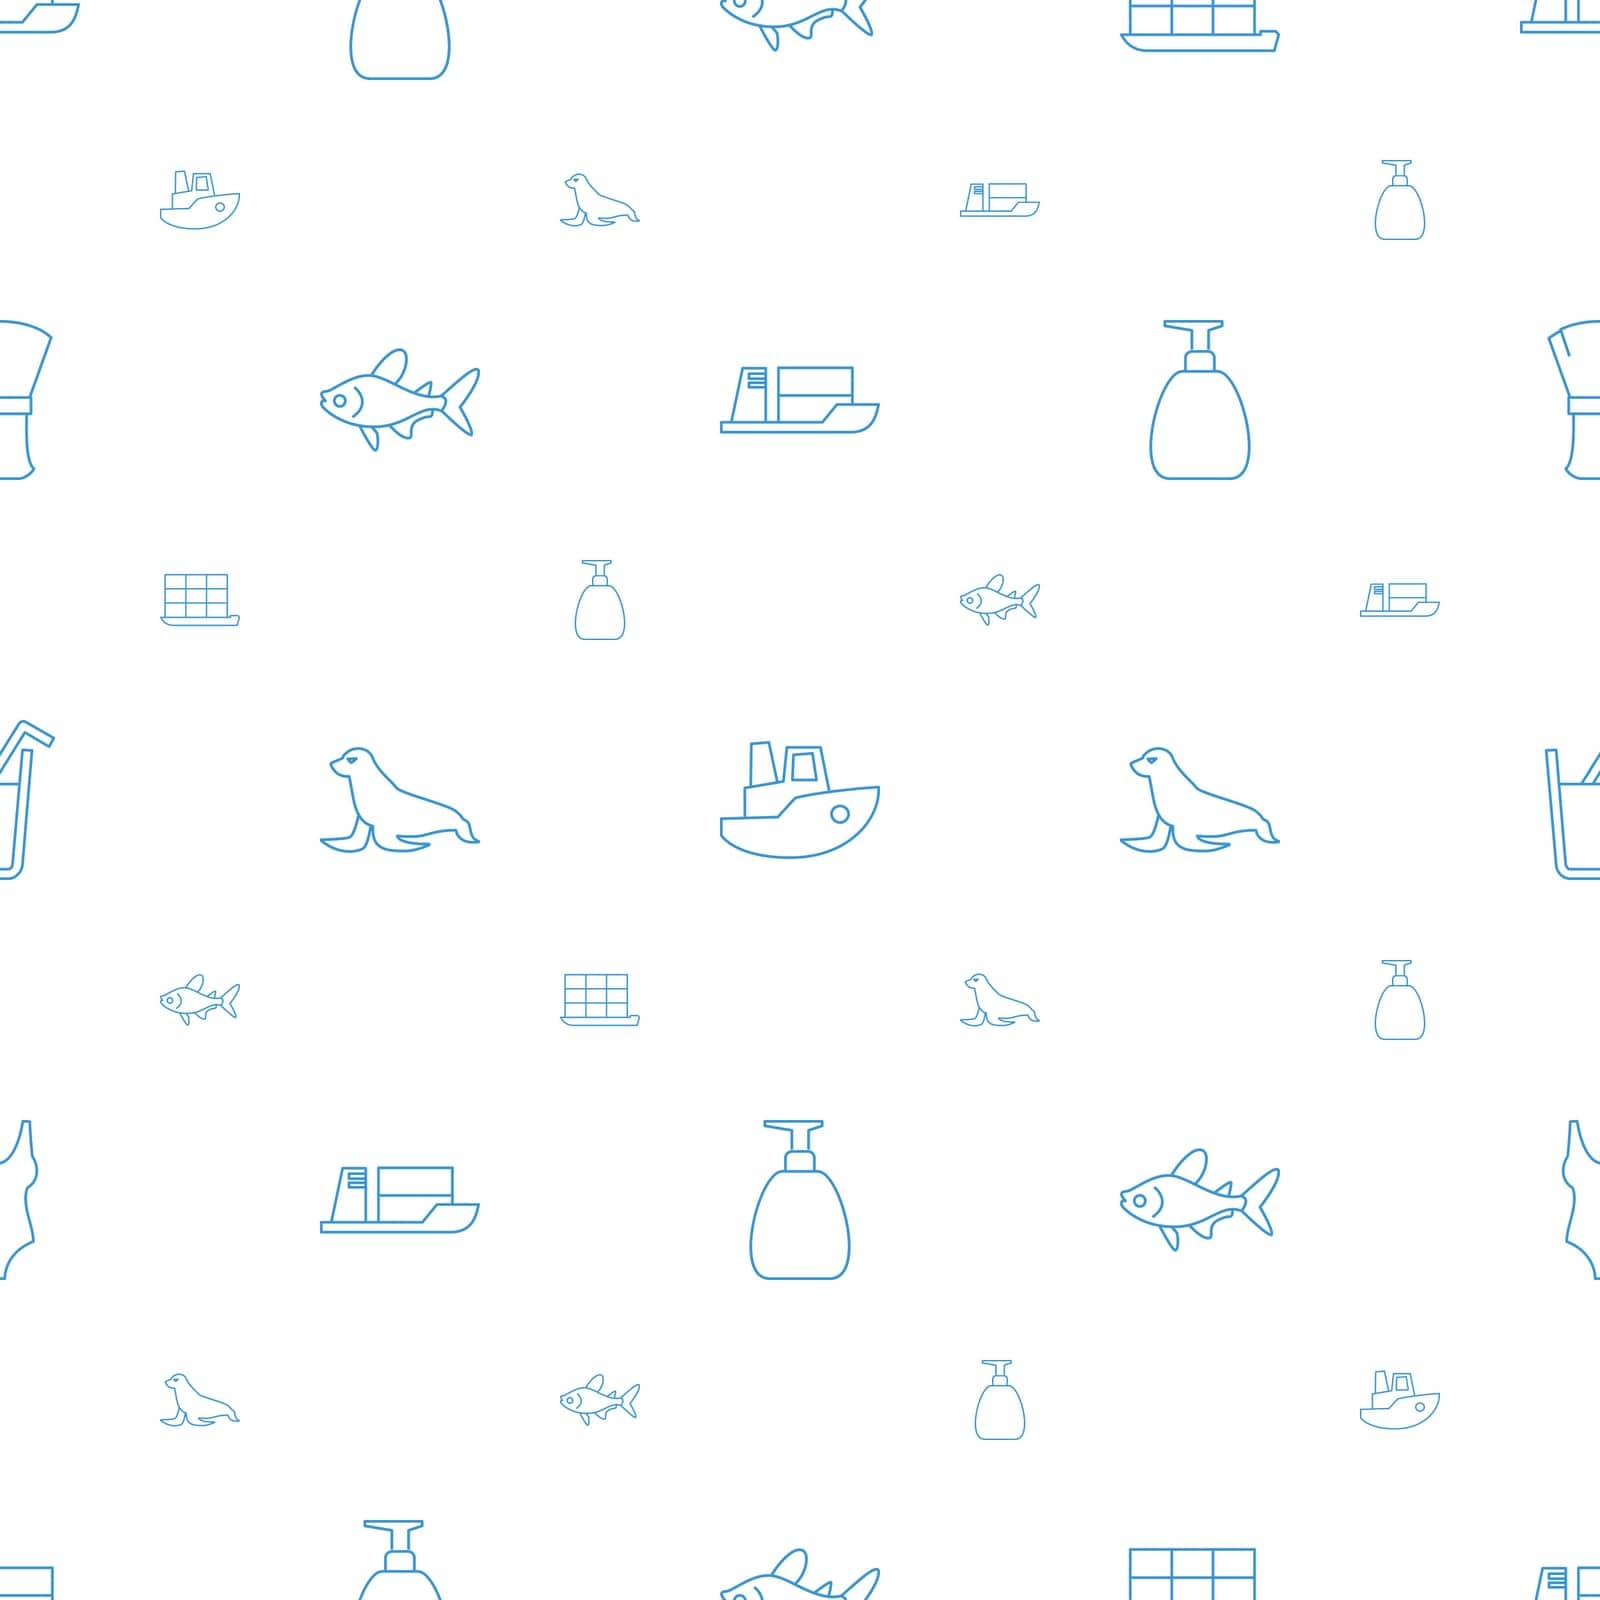 container,symbol,pattern,icon,sign,seal,isolated,ship,holiday,sea,marine,swimming,white,design,vector,cargo,graphic,soft,element,brush,business,black,shaving,water,drink,boat,transportation,plastic,ocean,background,fish,cruise,animal,illustration,suit,travel,swim,soap,object,care by ogqcorp